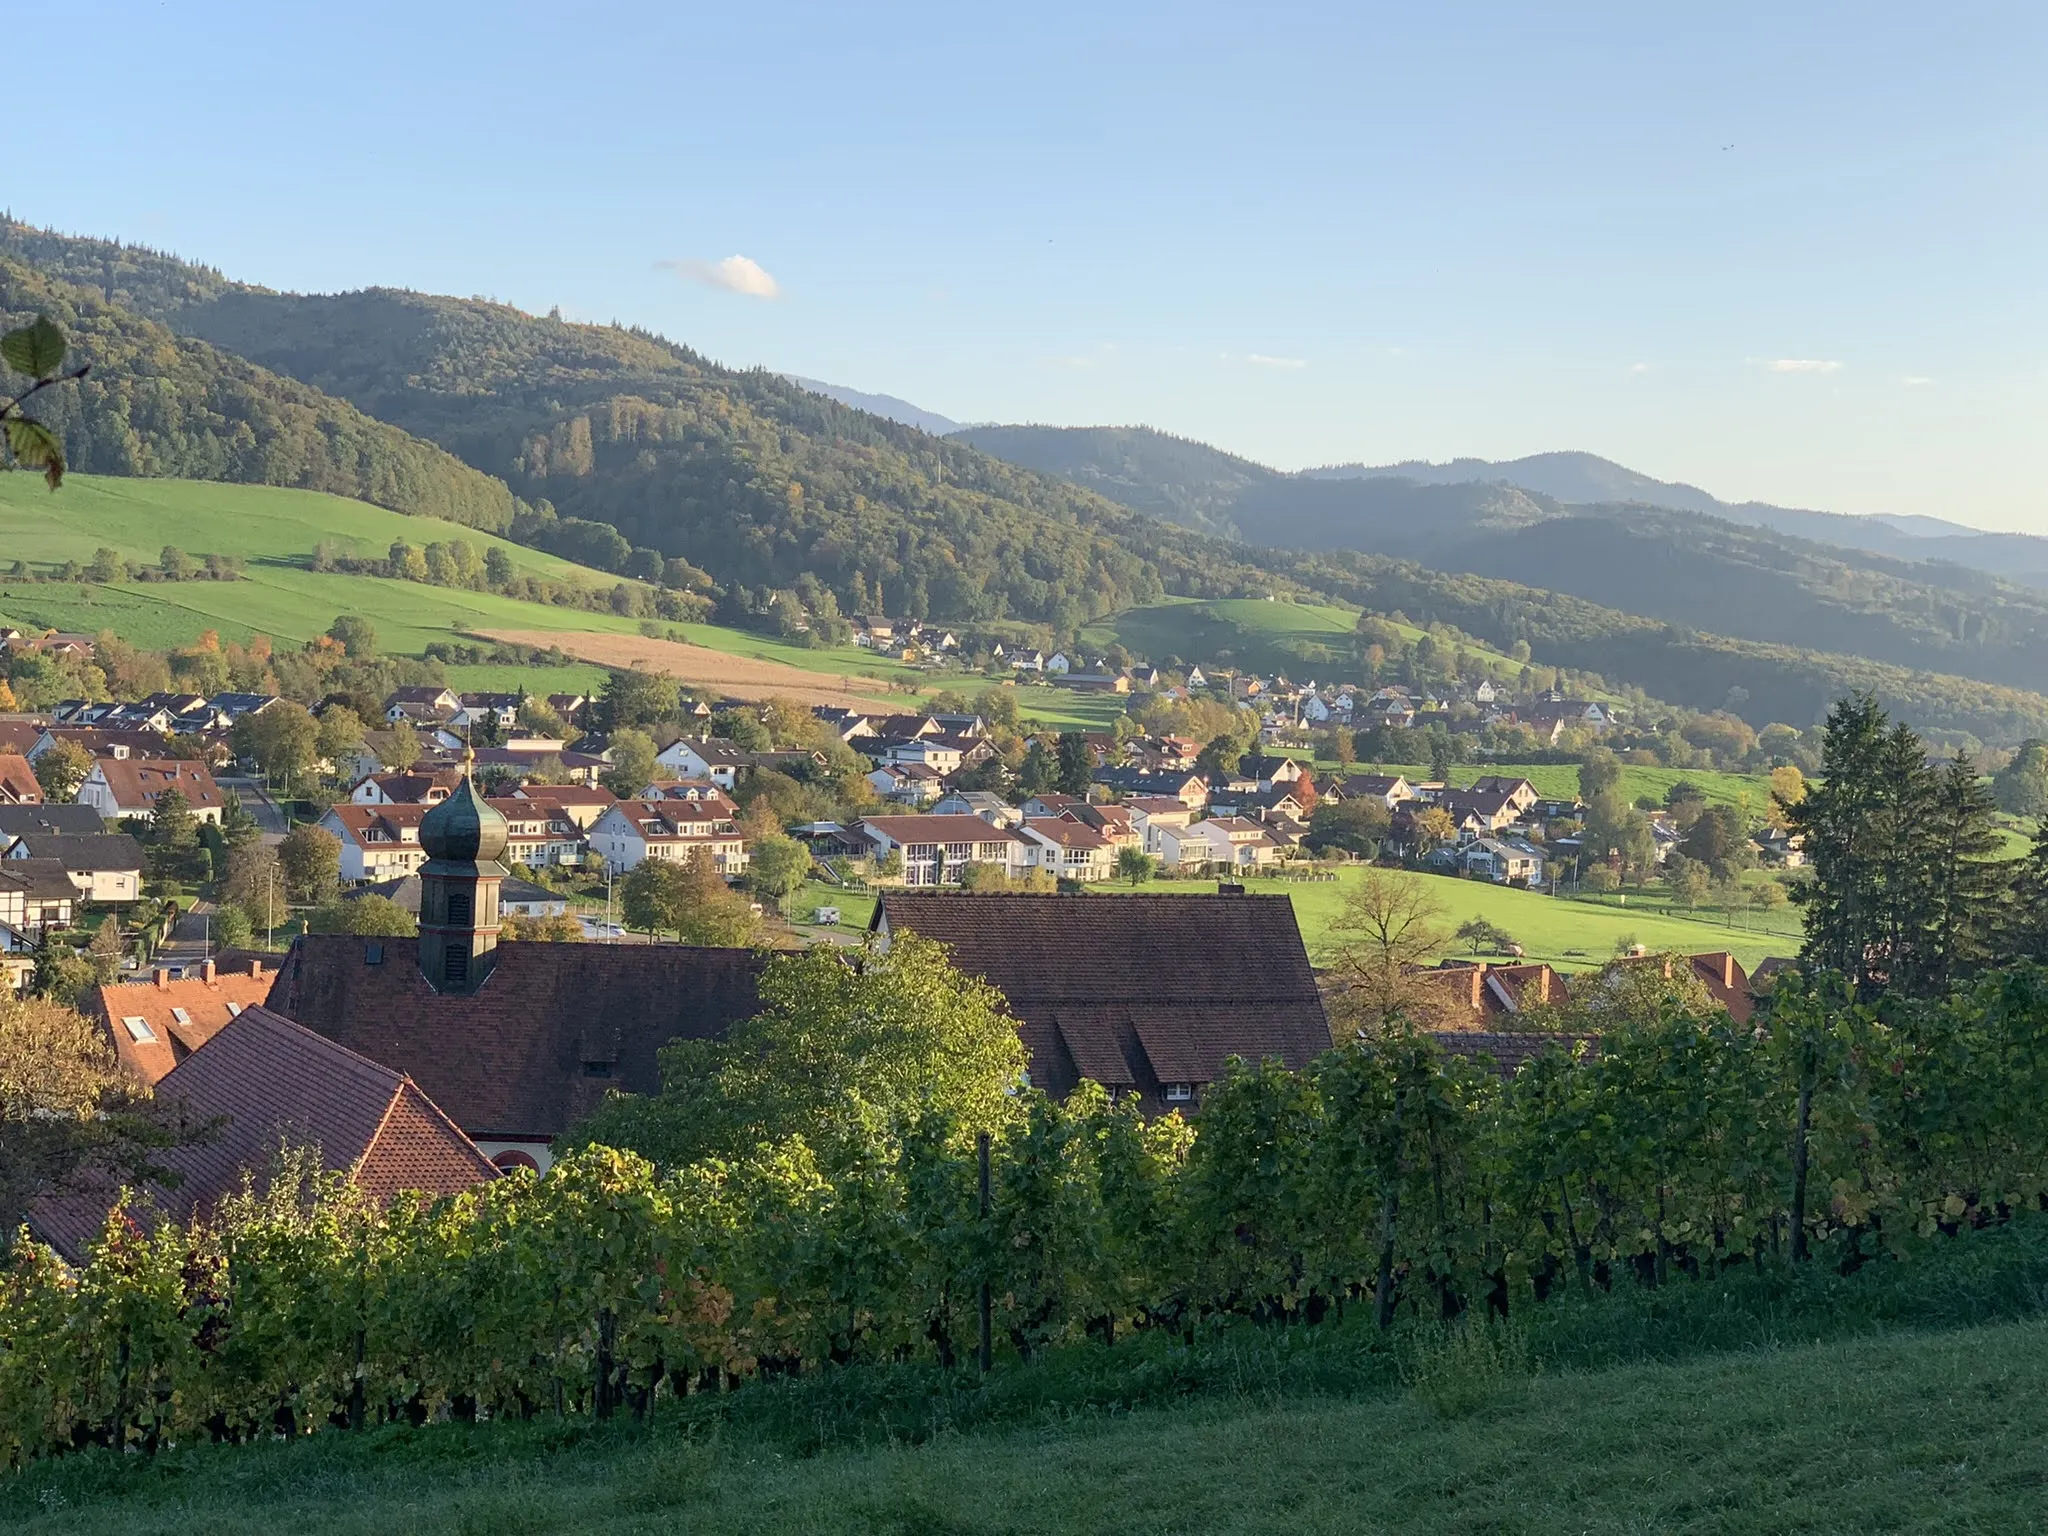 Photo showing: In the foreground the church of the Assumption of Mary in Wittnau, behind it the village spreading across Hexental, farther on the village of Sölden. The view is S.